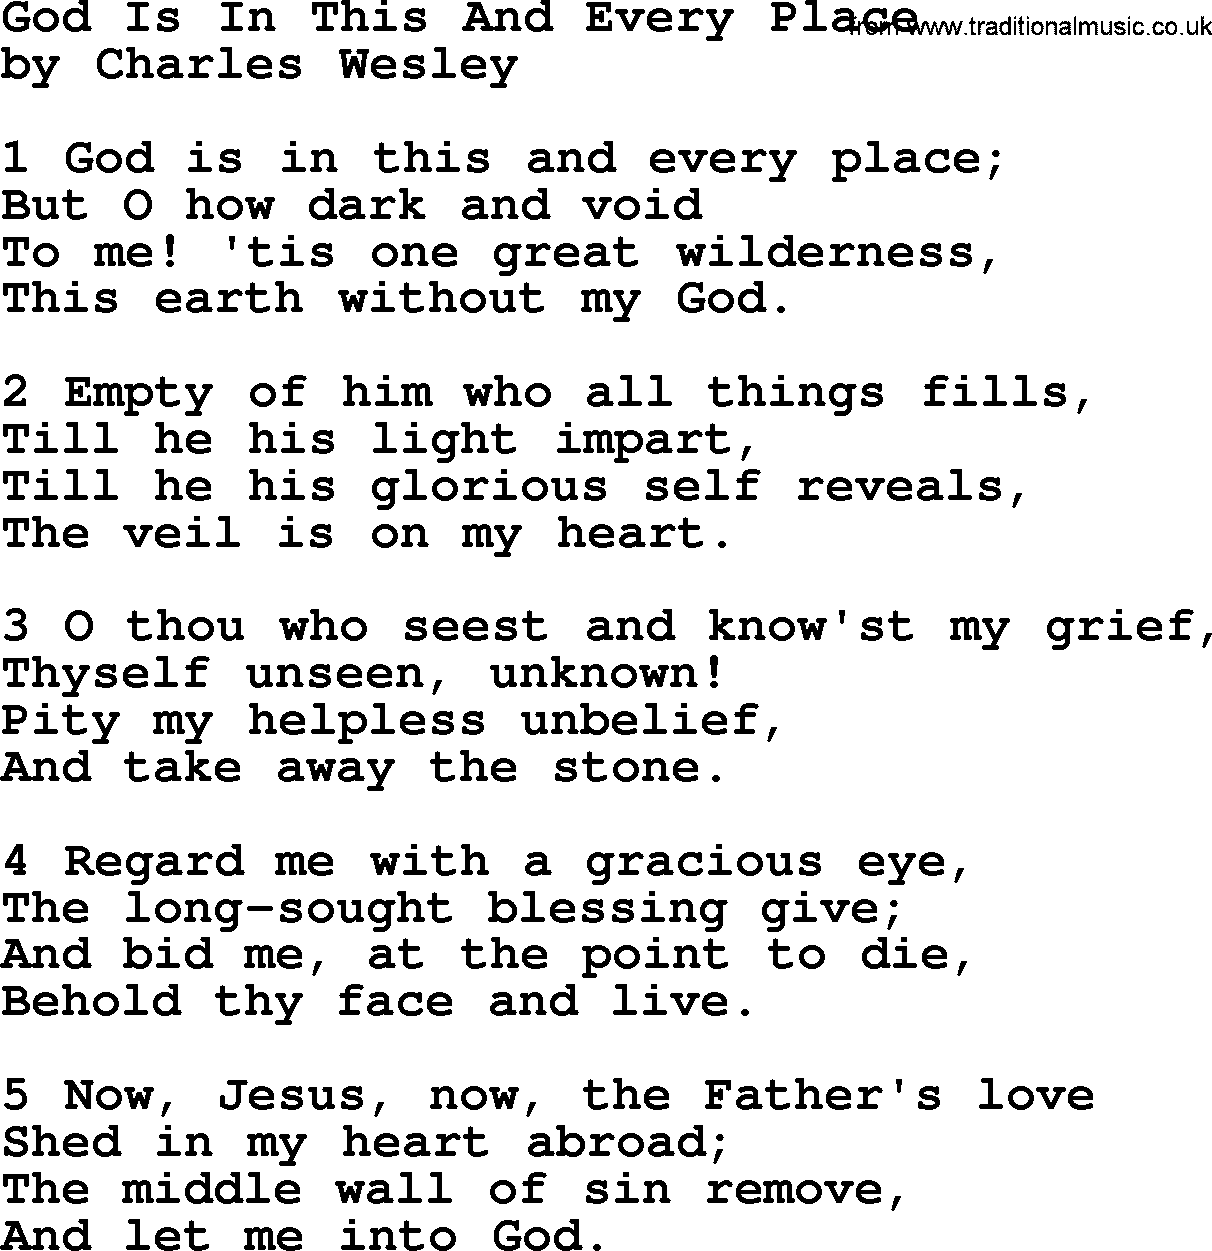 Charles Wesley hymn: God Is In This And Every Place, lyrics